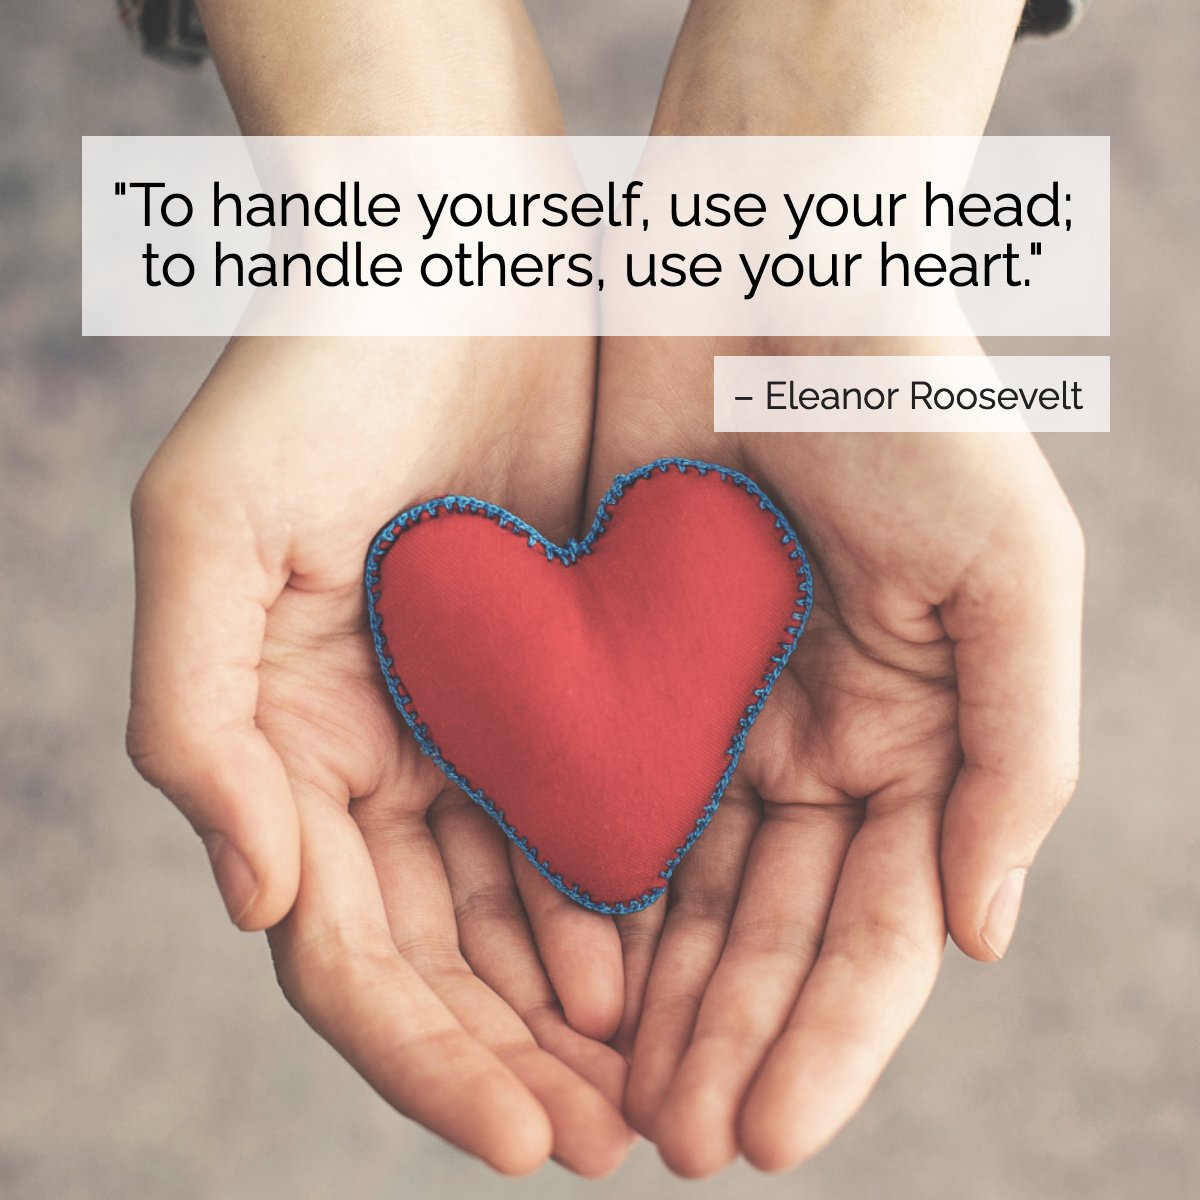 Eleanor Roosevelt was an American political figure, diplomat, and activist. 

She served as the first lady of the United States from 1933 to 1945!

#inspiring #quote #eleanorroosevelt #inspirational 
 #CanvasRE #MonicaMendesRealtor